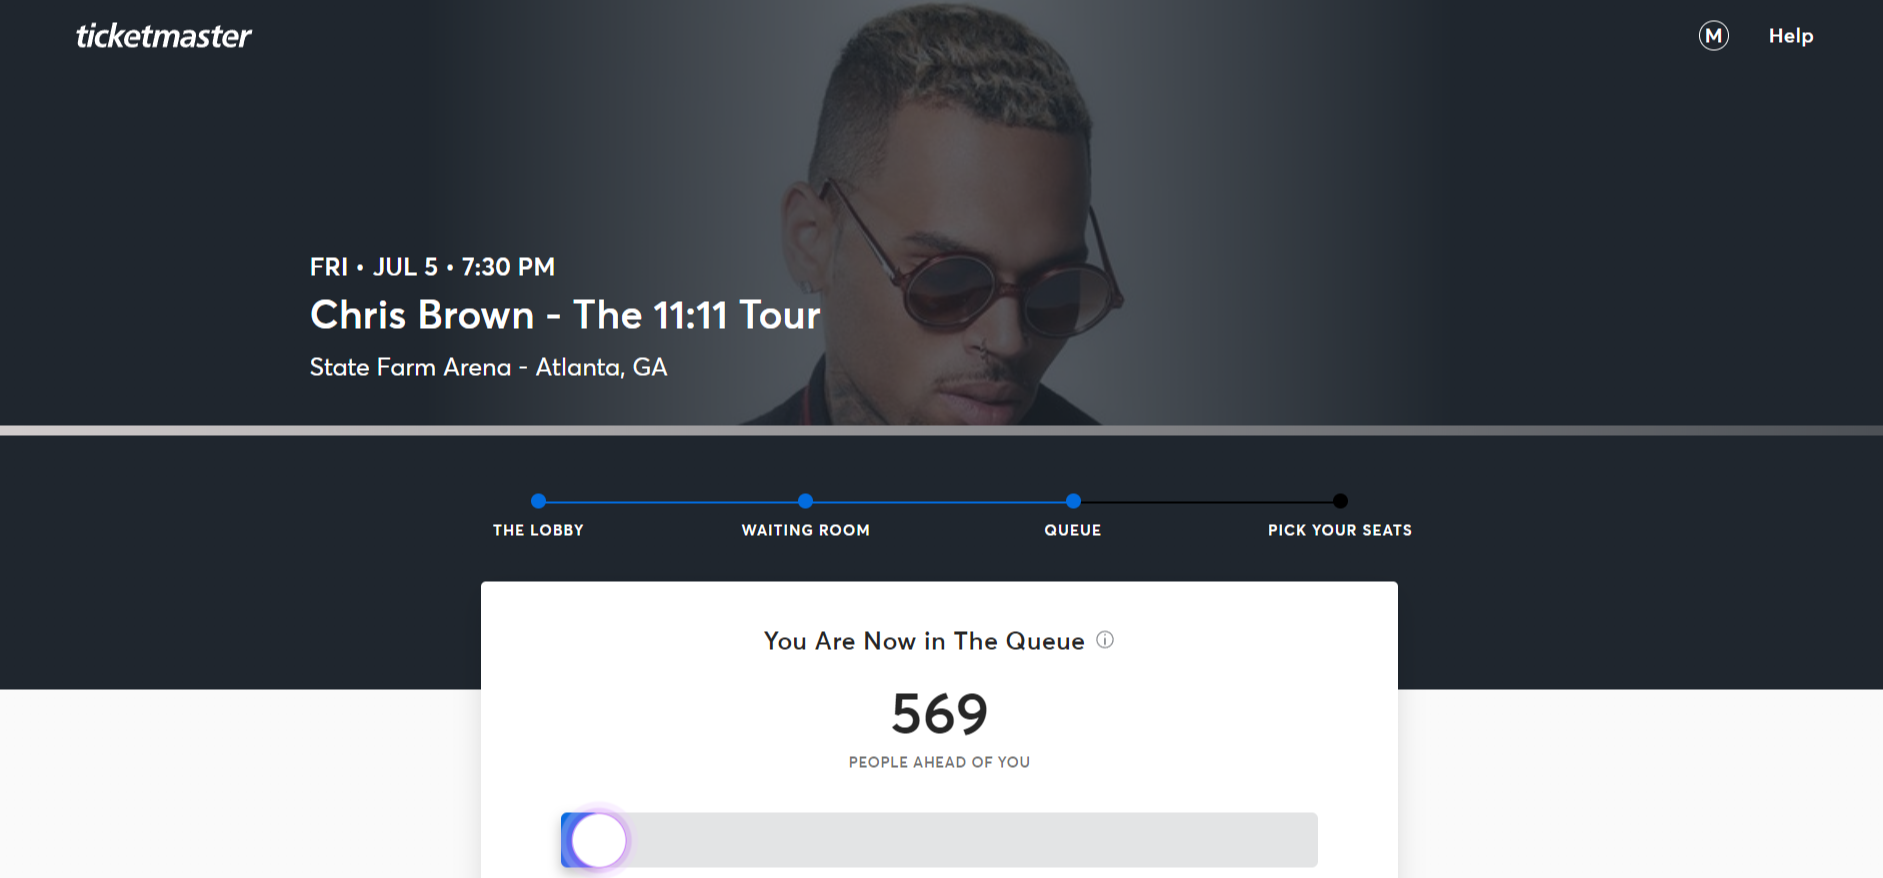 Chris Brown tickets are on sale now